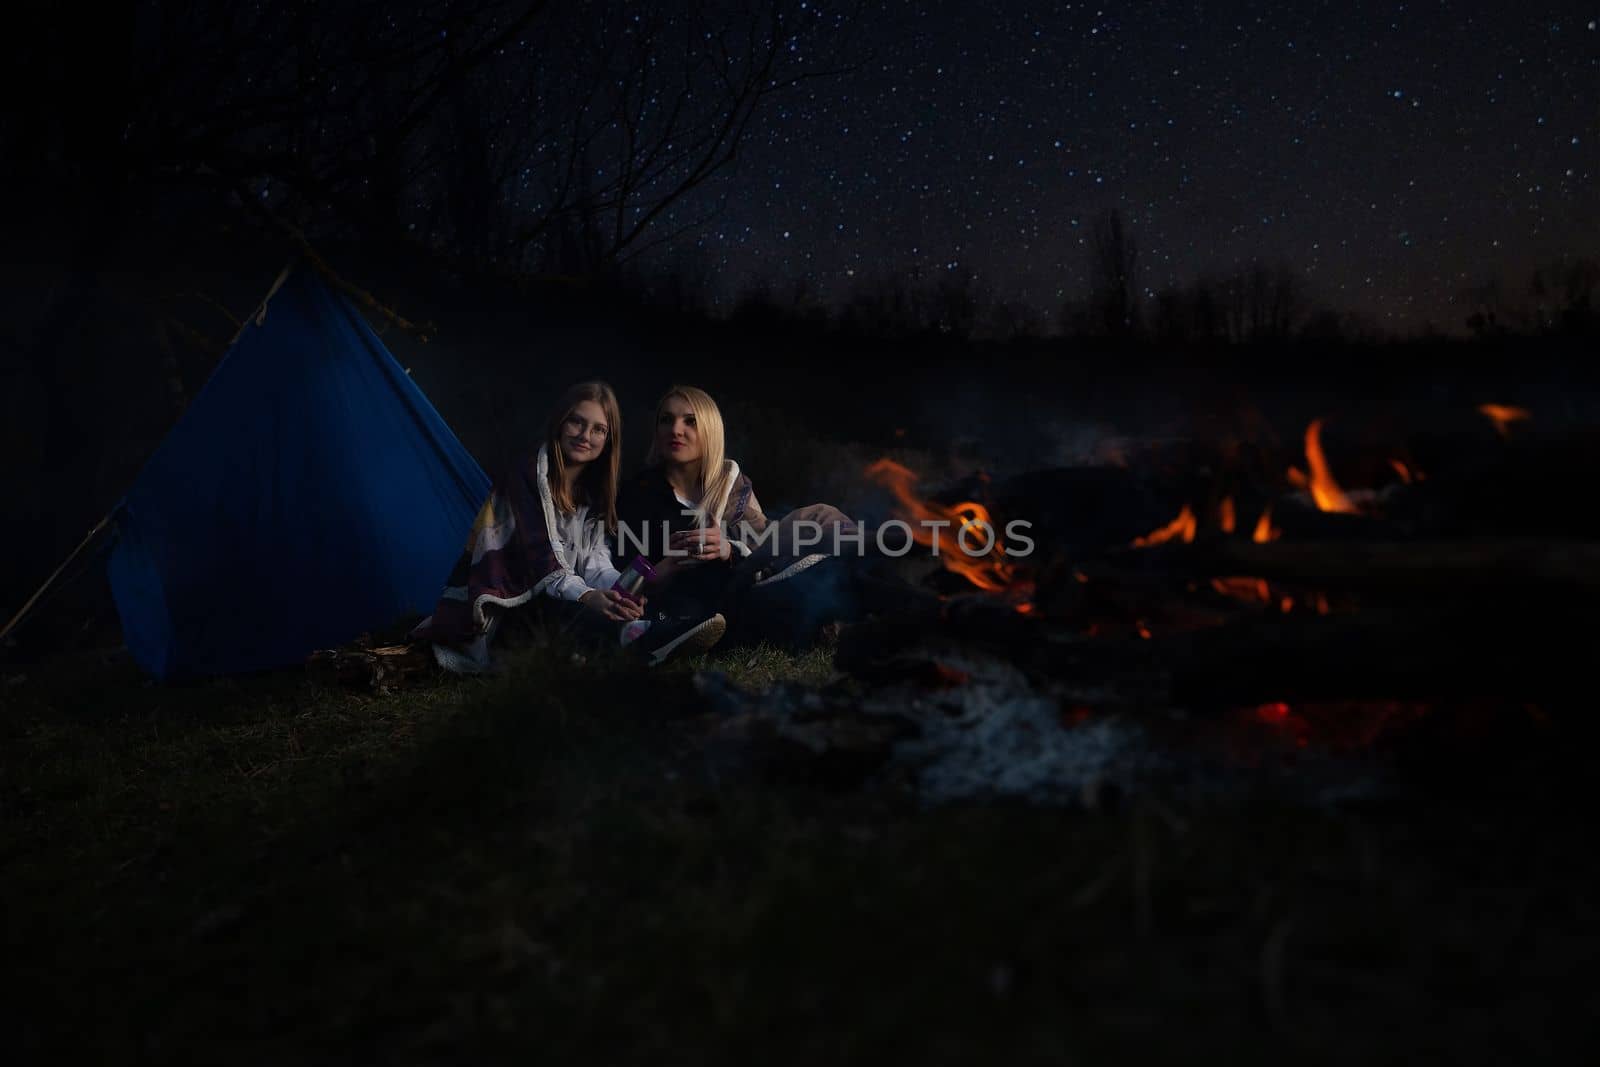 The family, mother and daughter, for the weekend went out into the countryside for a picnic, sit by the fire in the wild with a tent, fry potatoes, drink hot tea. High quality photo